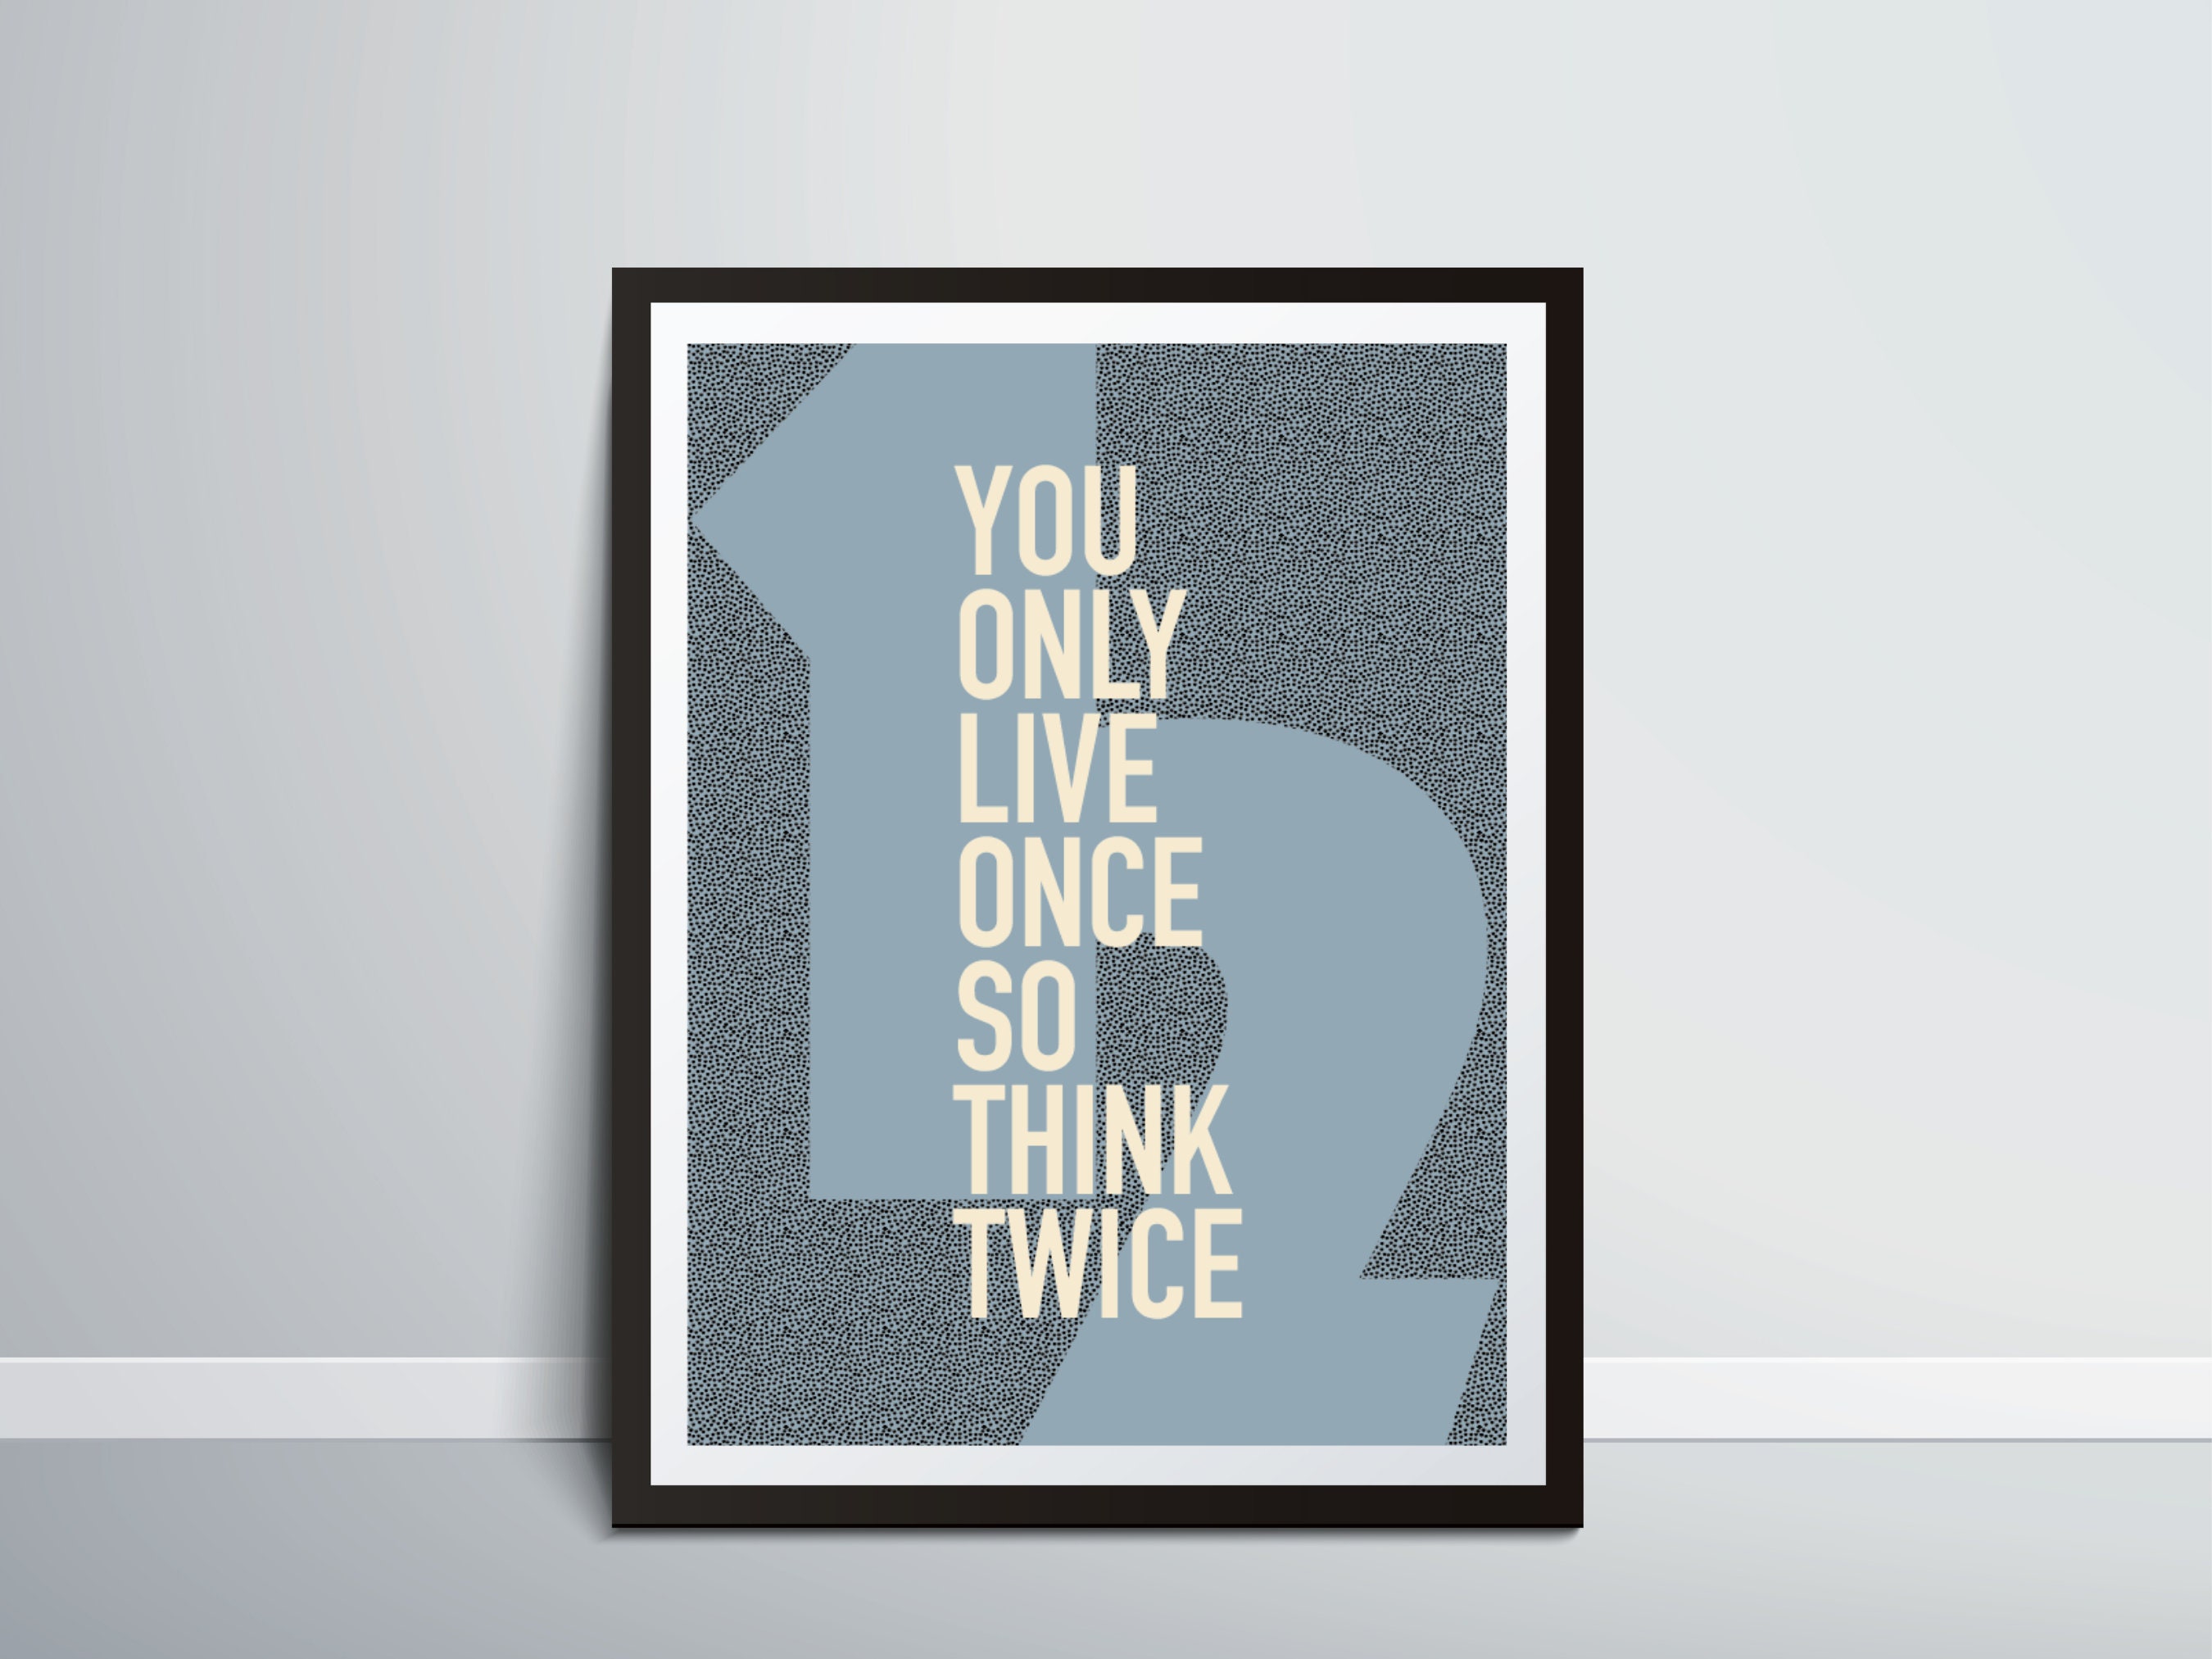 The Strokes You Only Live Once Posters for Sale